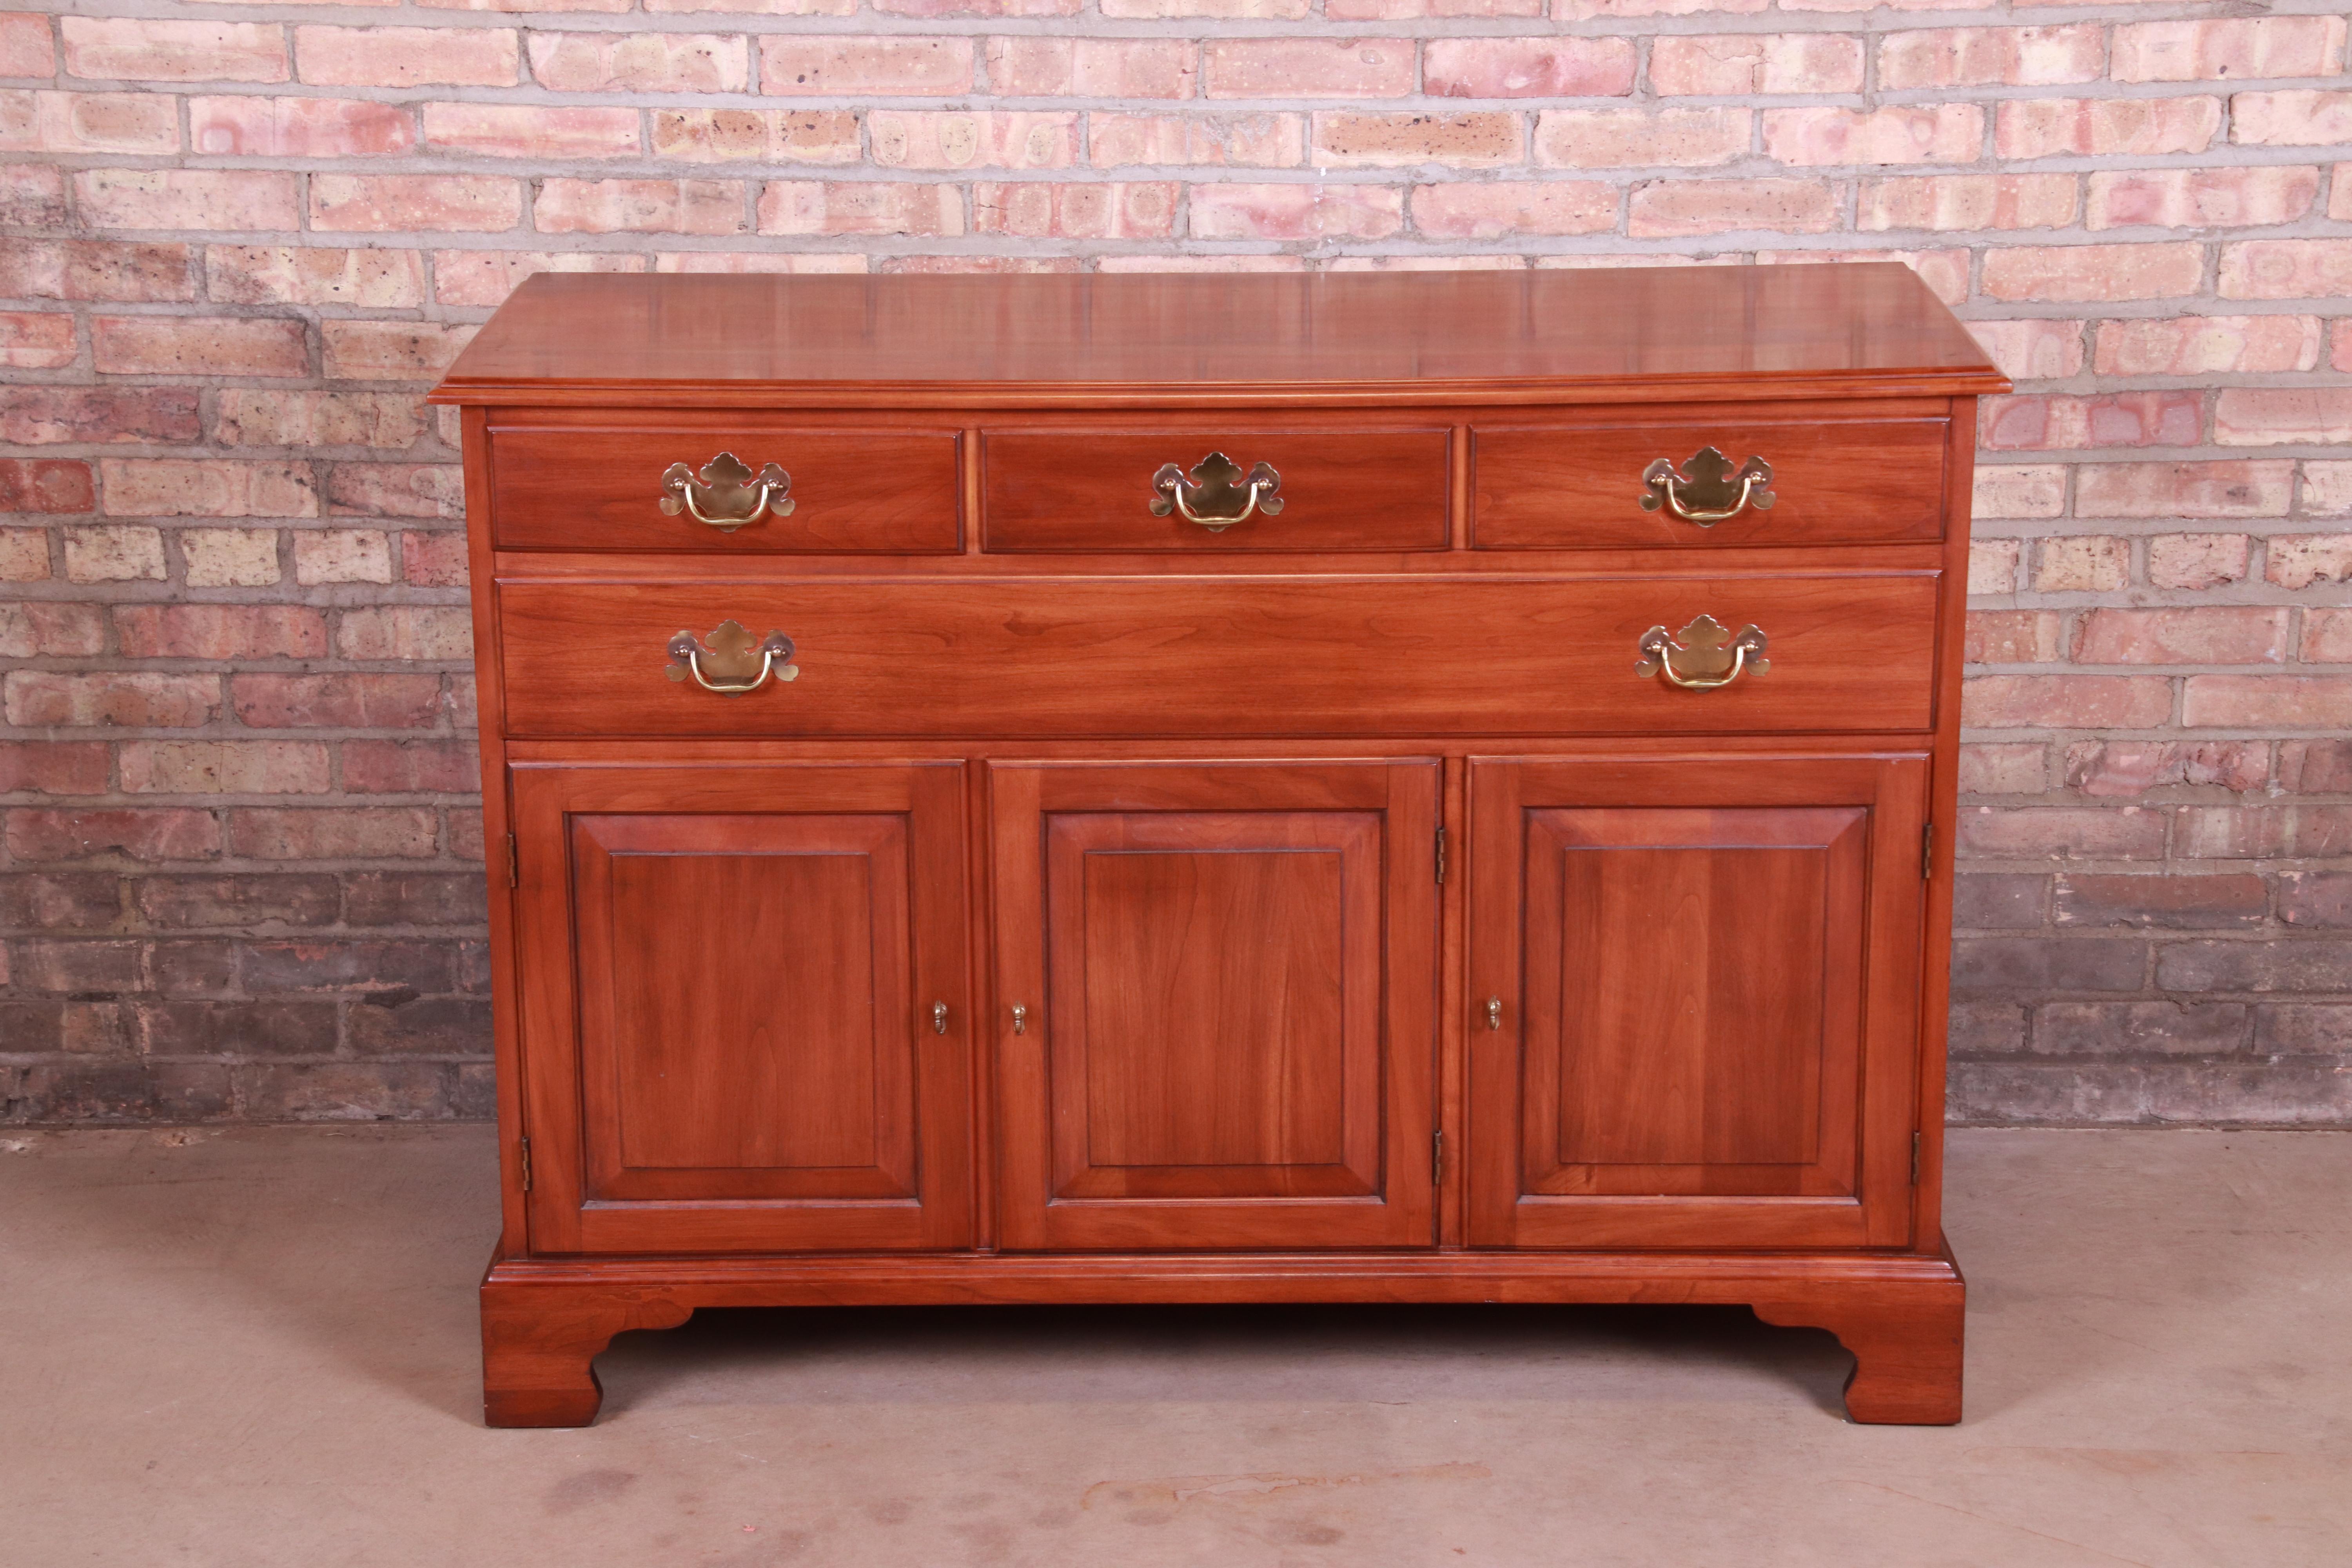 A gorgeous American Colonial style sideboard, buffet server, or bar cabinet

By Henkel Harris

USA, Late 20th century

Solid cherry wood, with original brass hardware.

Measures: 50